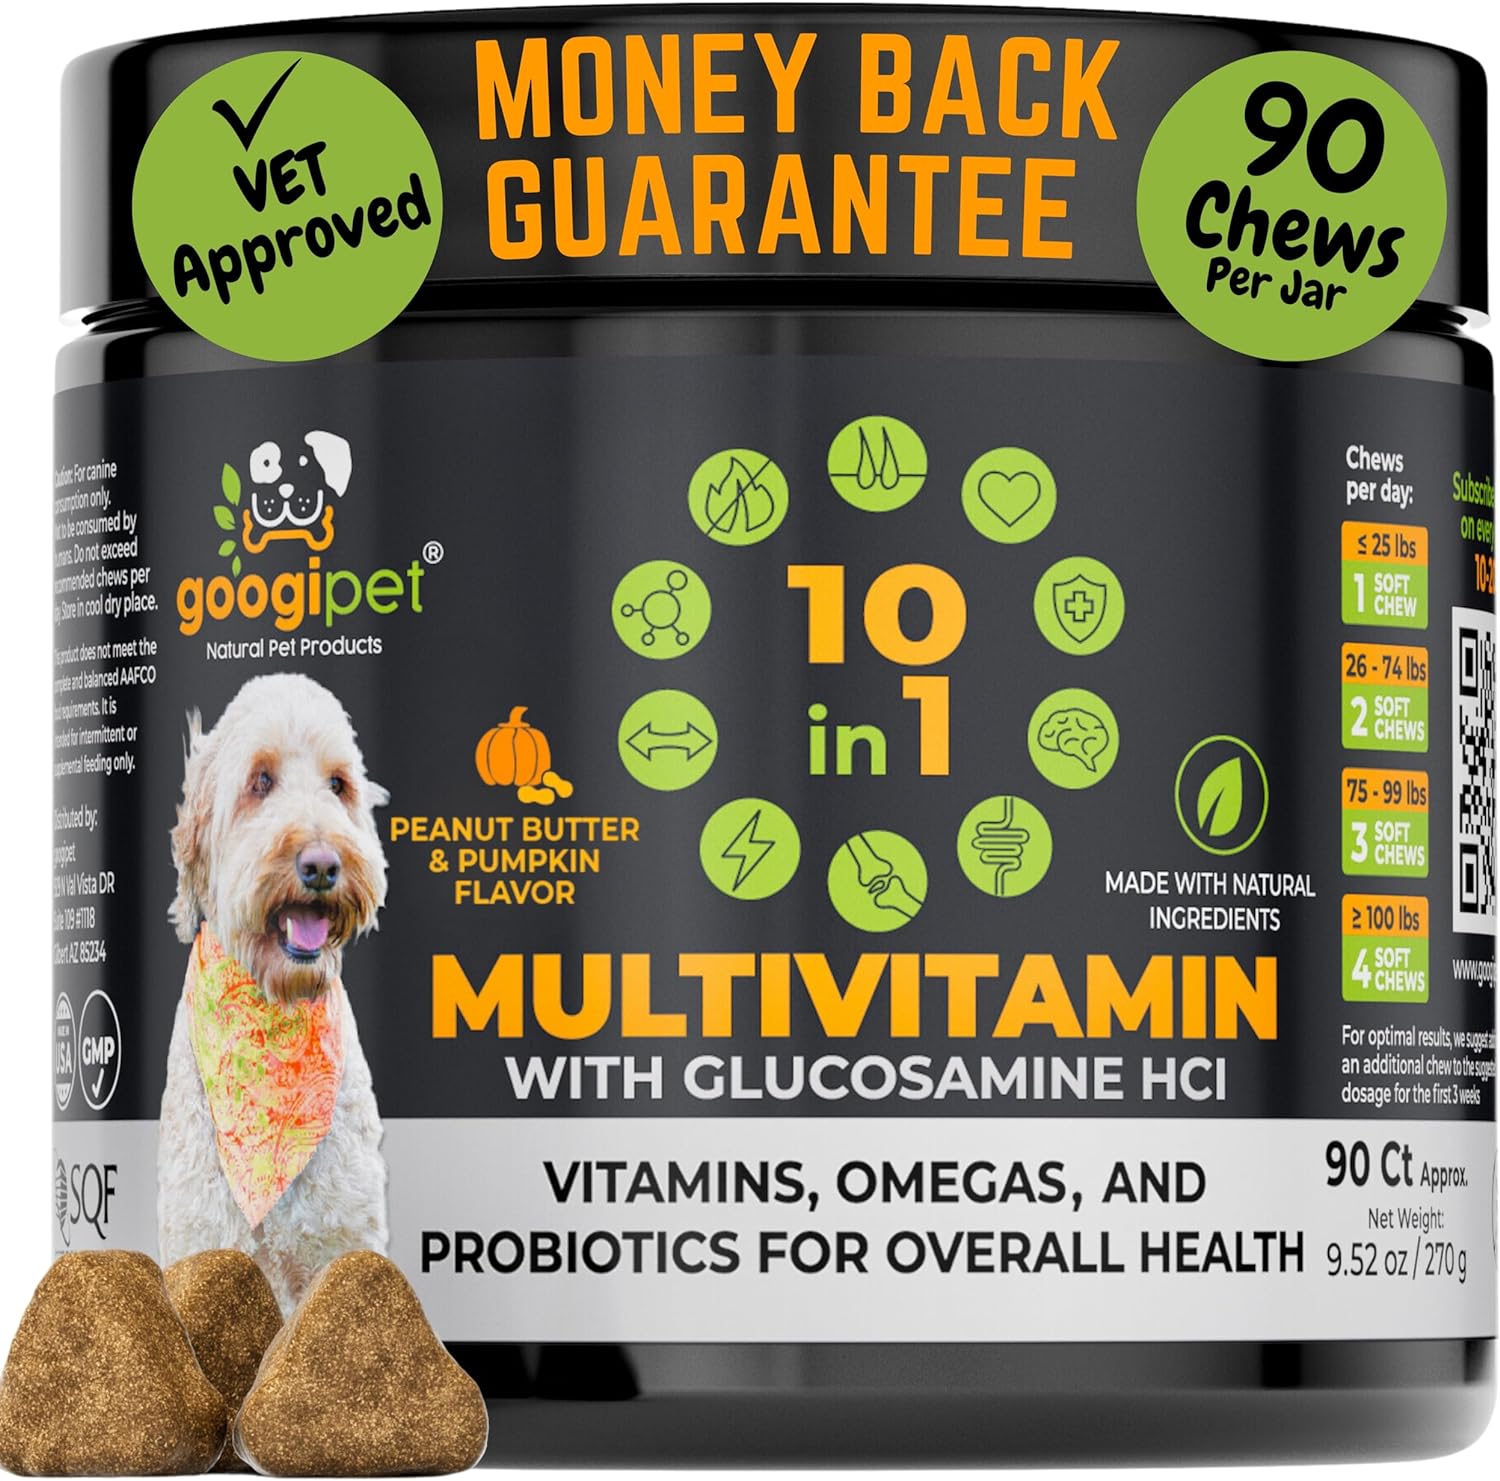 Googipet 10 in 1 Dog Multivitamin Chewable with Dog Probiotics for Gut Health, Dog Vitamins and Supplements w/Vitamin C & Glucosamine for Joint Support - Omega 3s (Peanut Butter & Pumpkin Flavor)